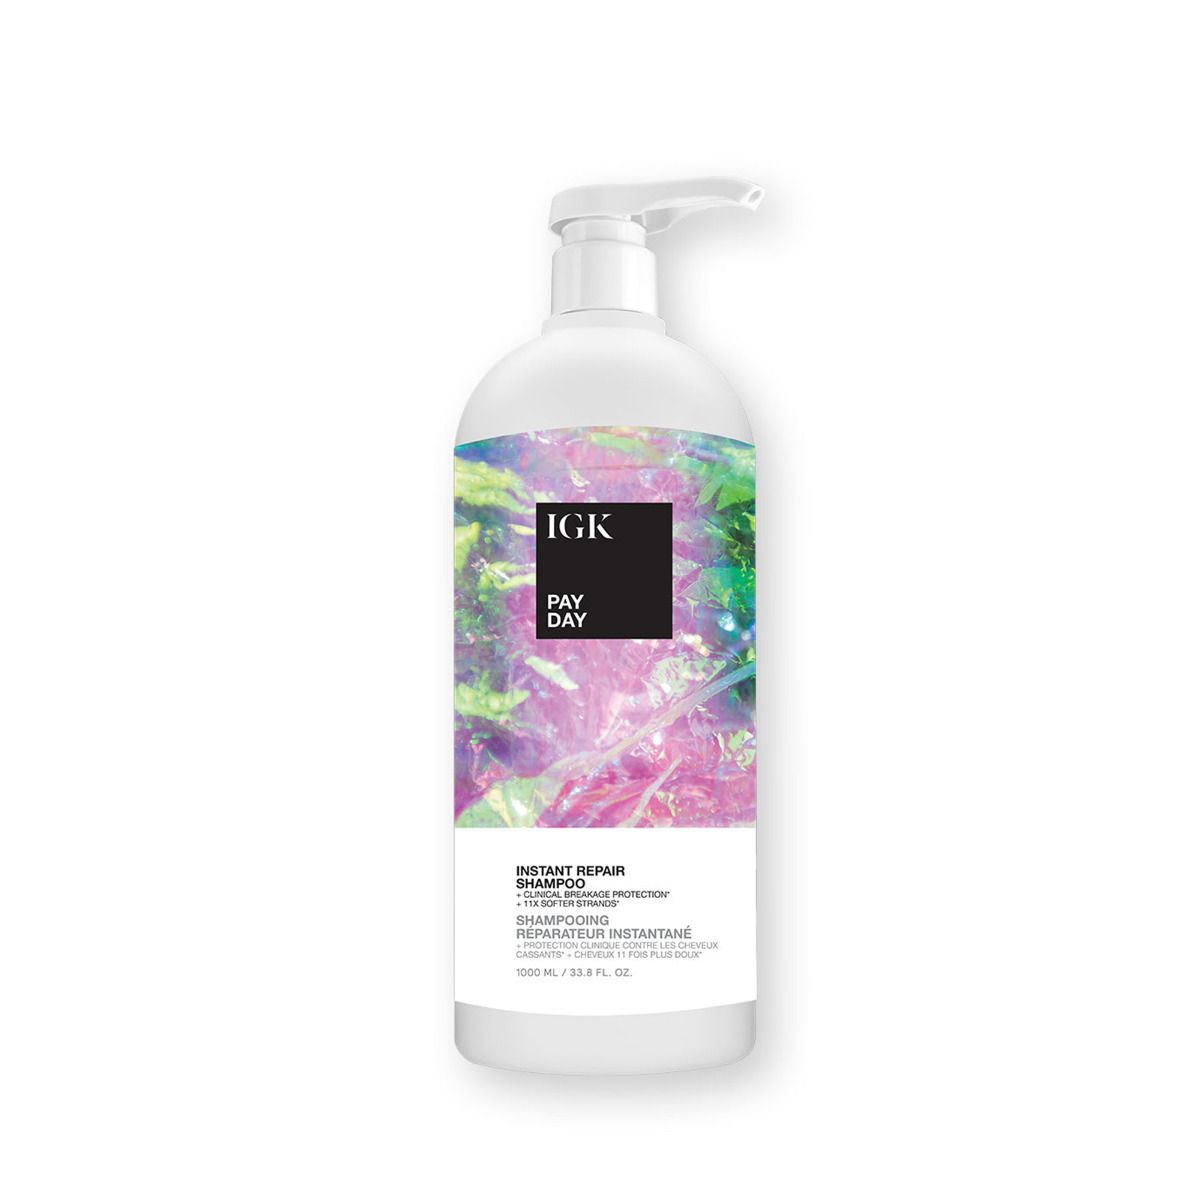 IGK Pay Day Instant Repair Shampoo - Liter